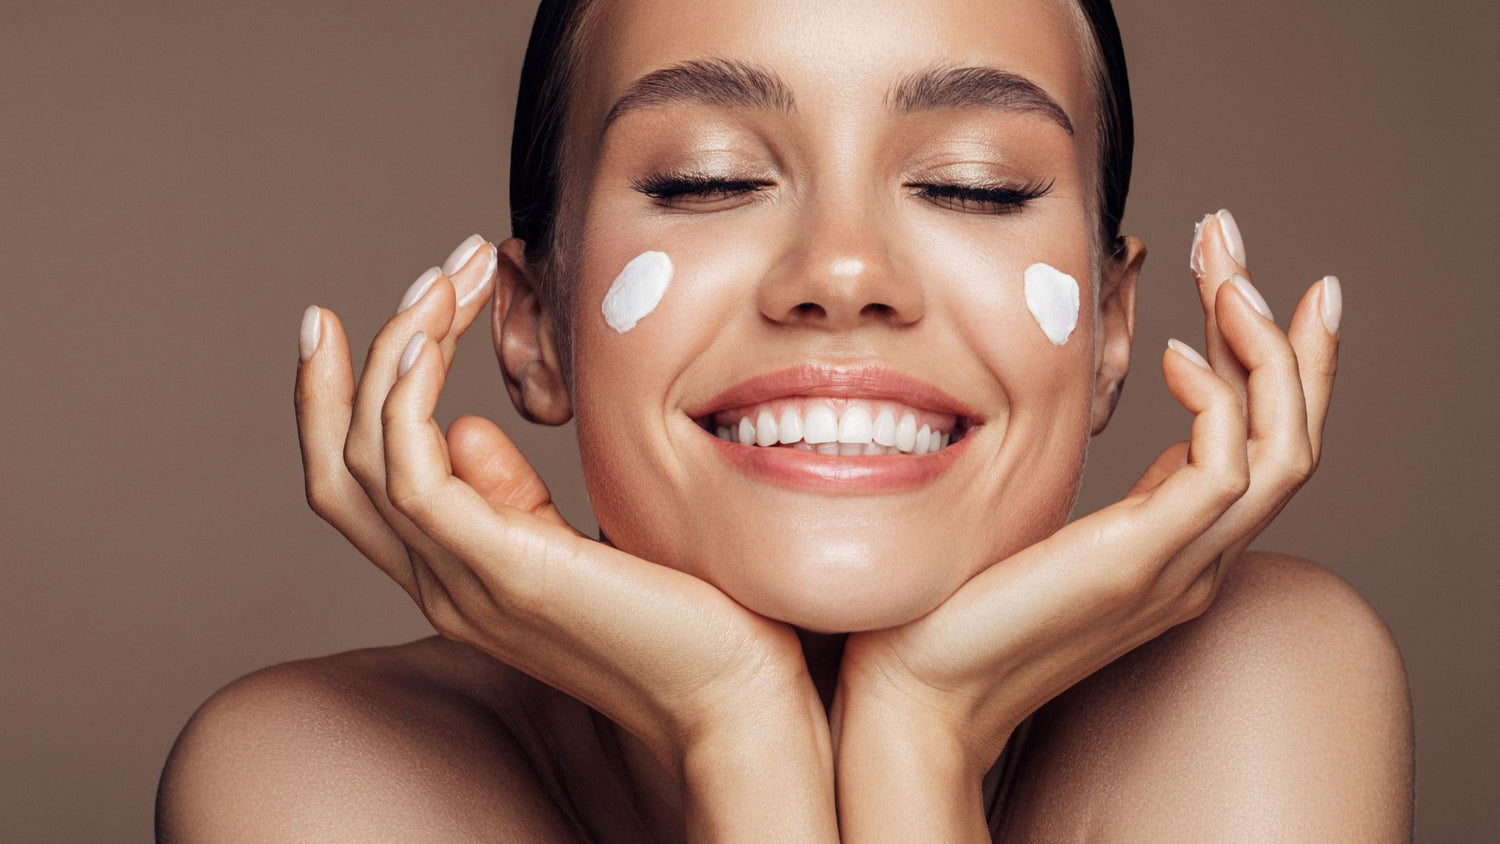 How to Take Care of Your Skin in Your 20s